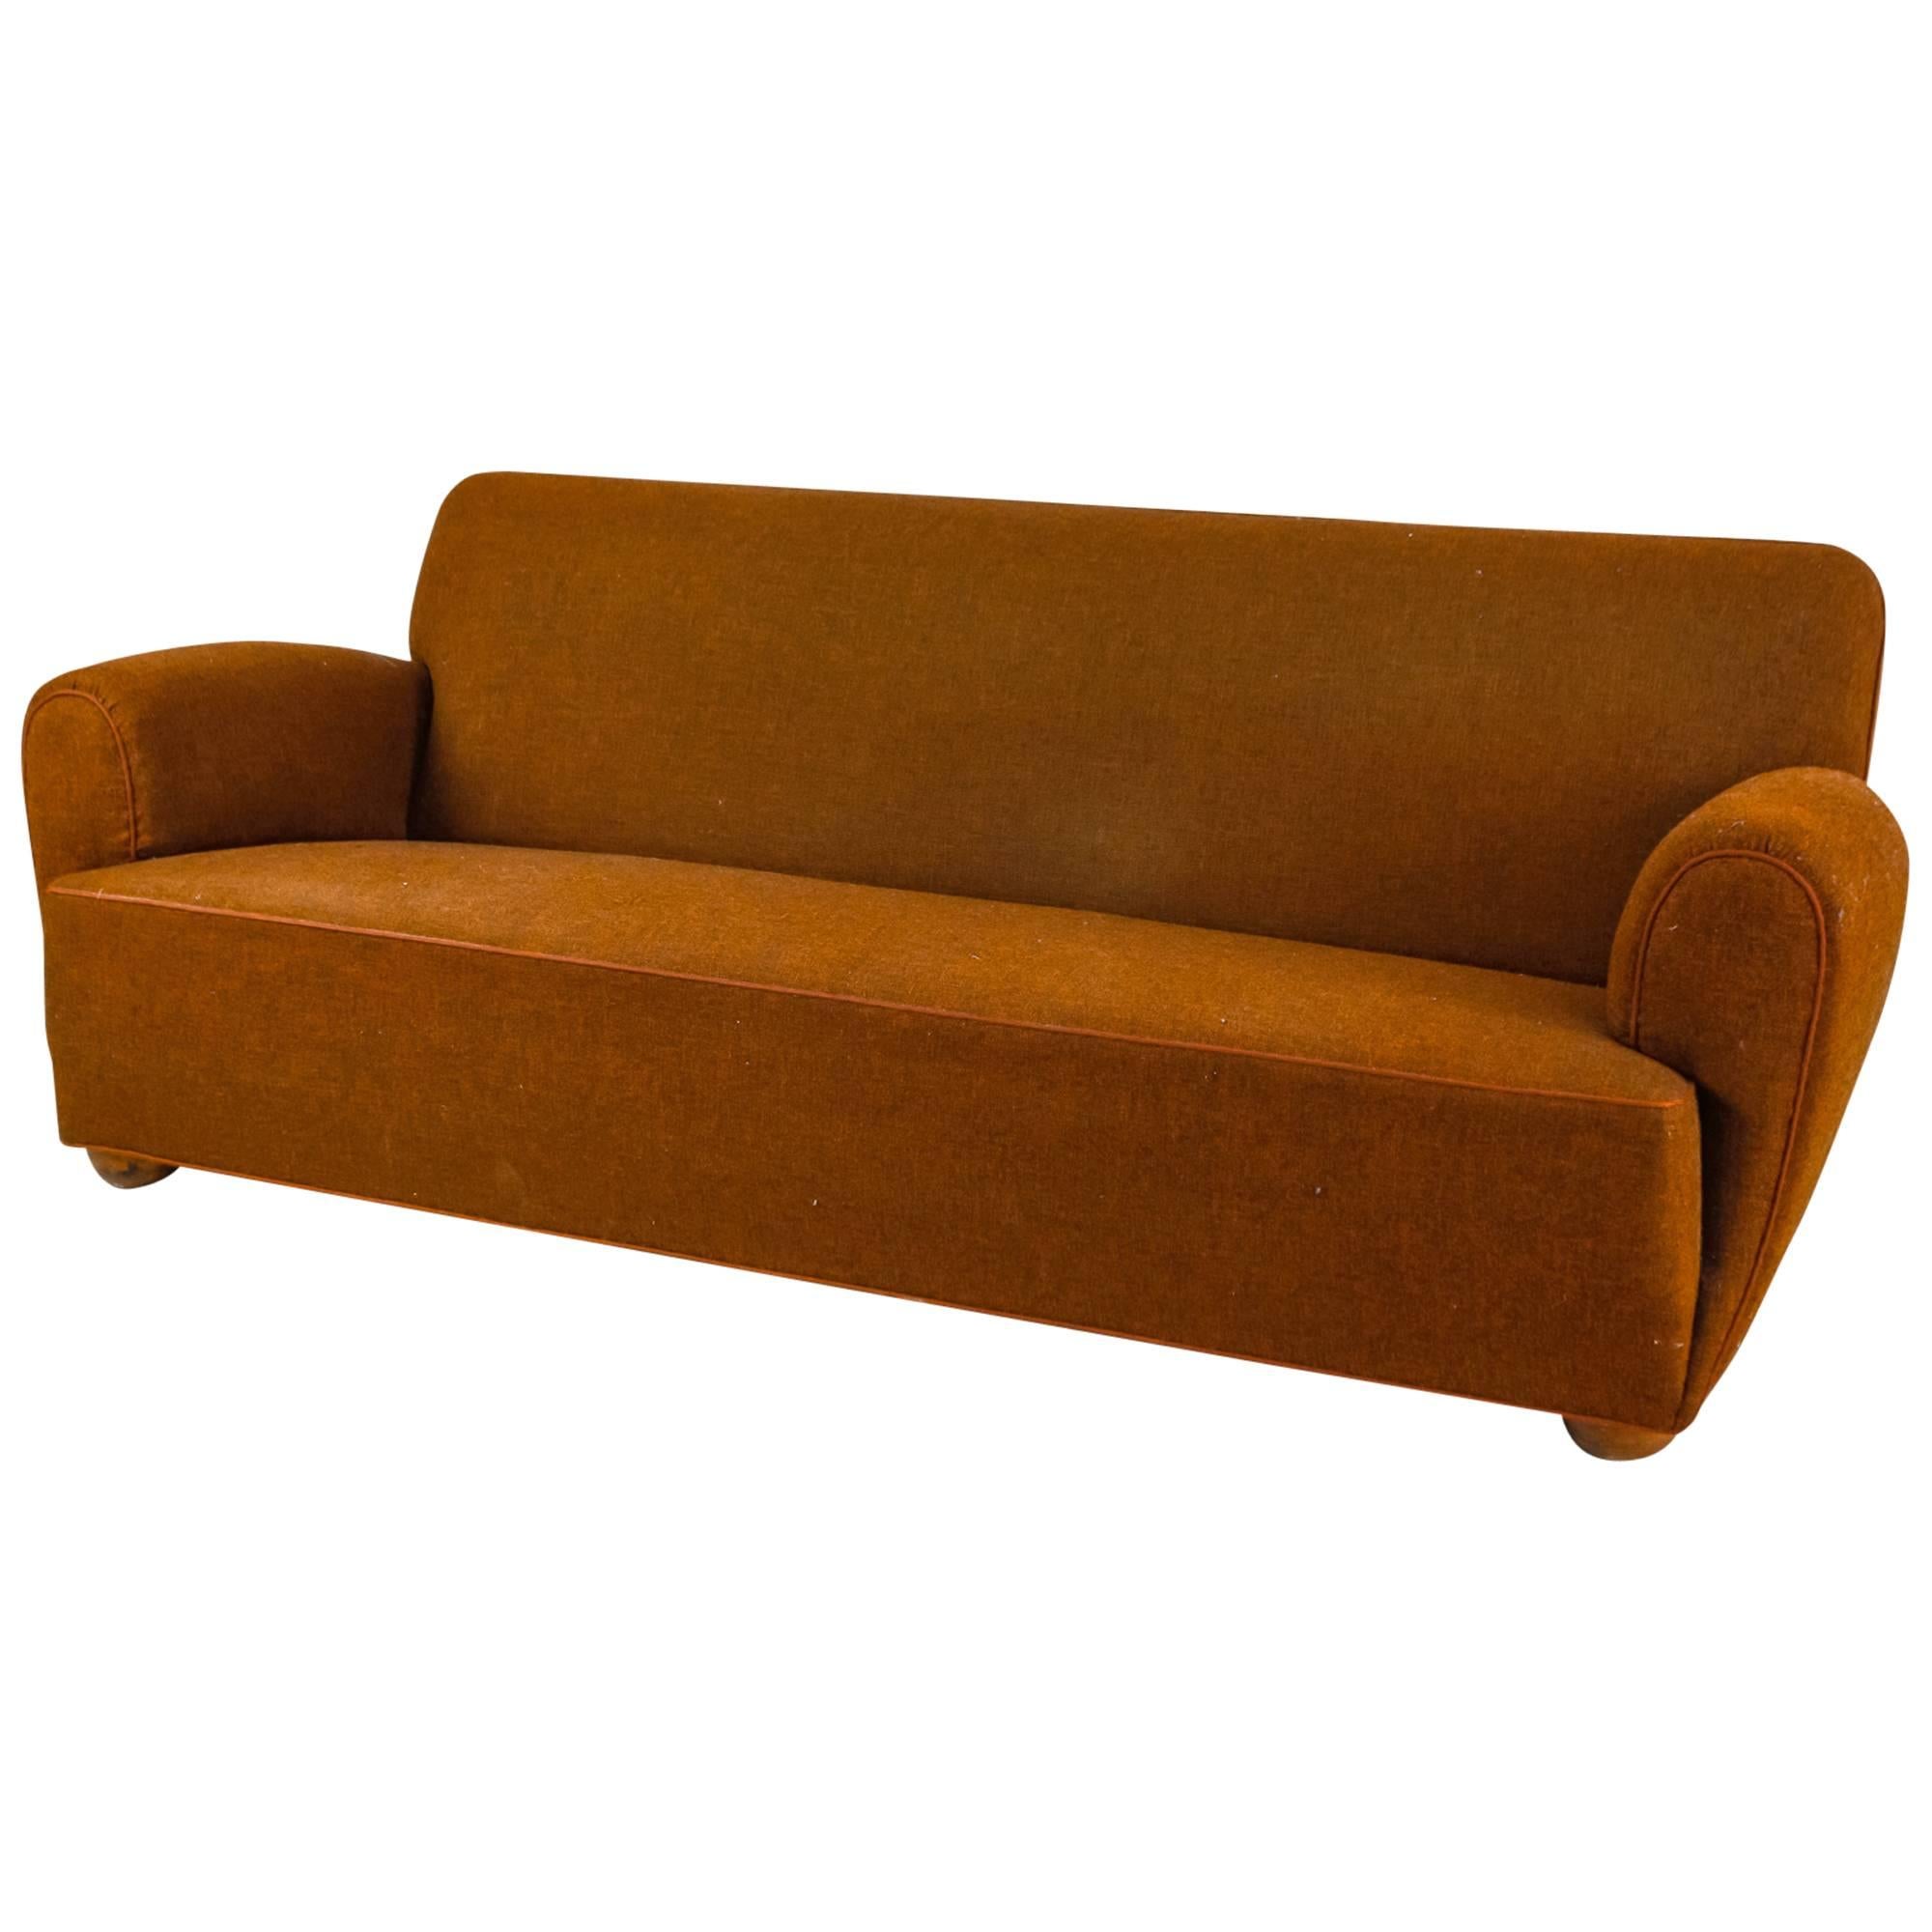 Danish Rounded Three-Seat Sofa with Brown Wool Upholstery, 1940s For Sale